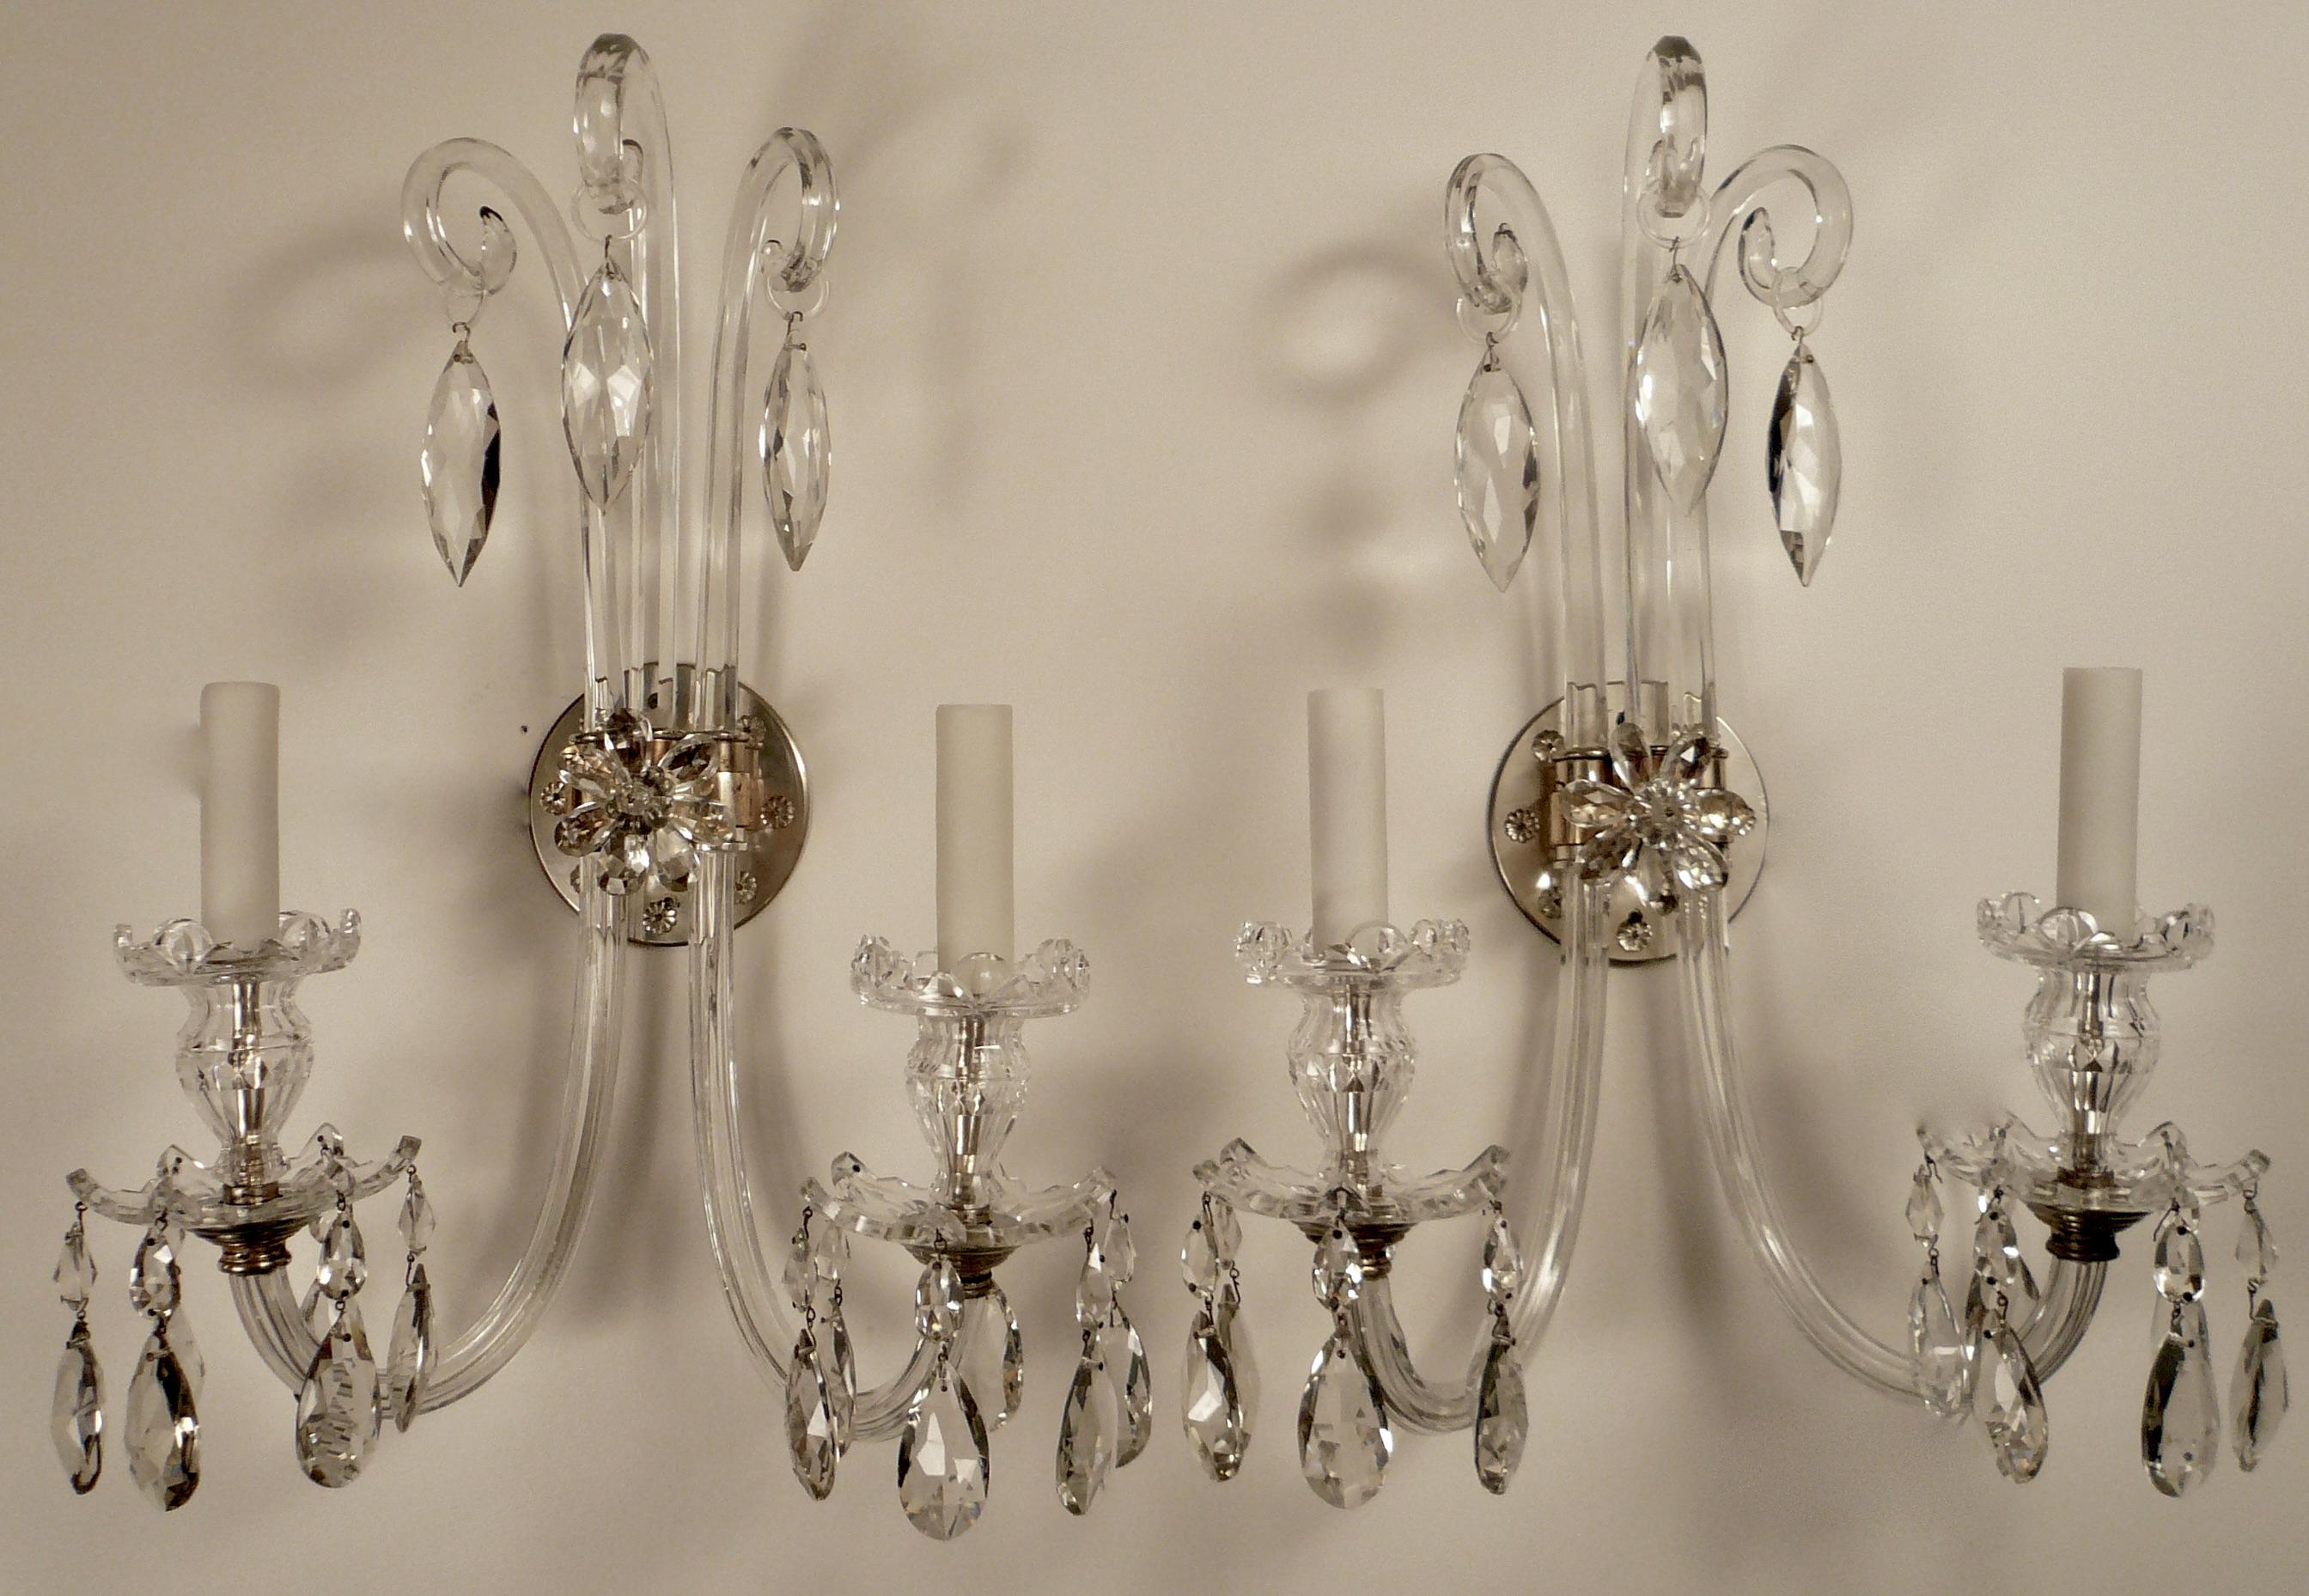 This beautiful pair of English Neo-Classical sconces feature panel cut J-arms, and Van Dyke style bobeches and candle cups. The pear shaped pendants are of the finest quality.